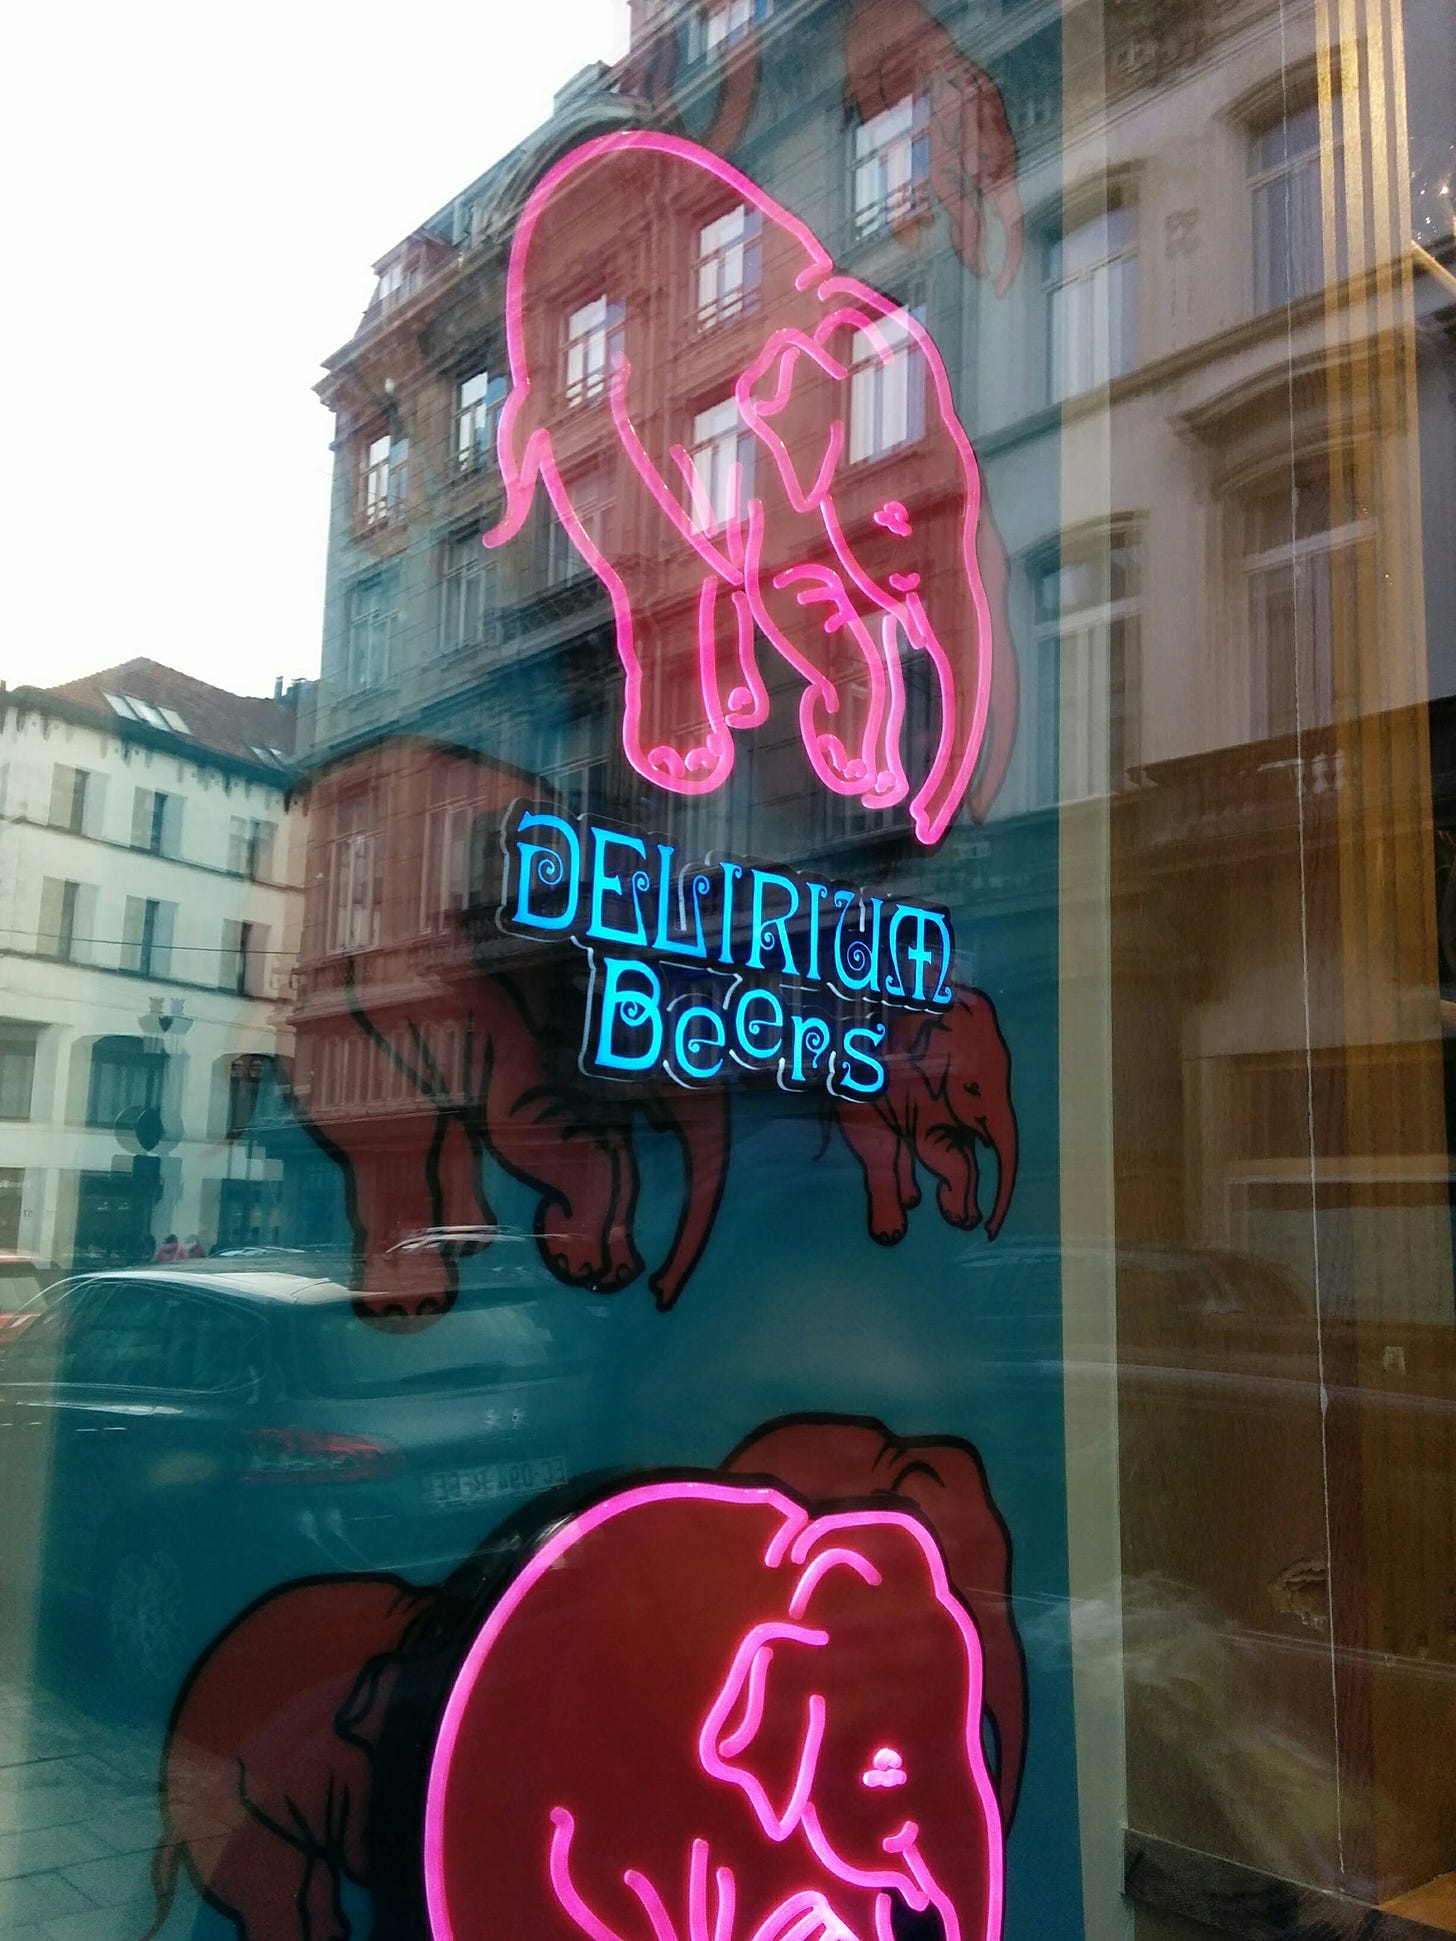 Image of "Delirium Beers", a Belgian beer brand, from a bar in Brussels.